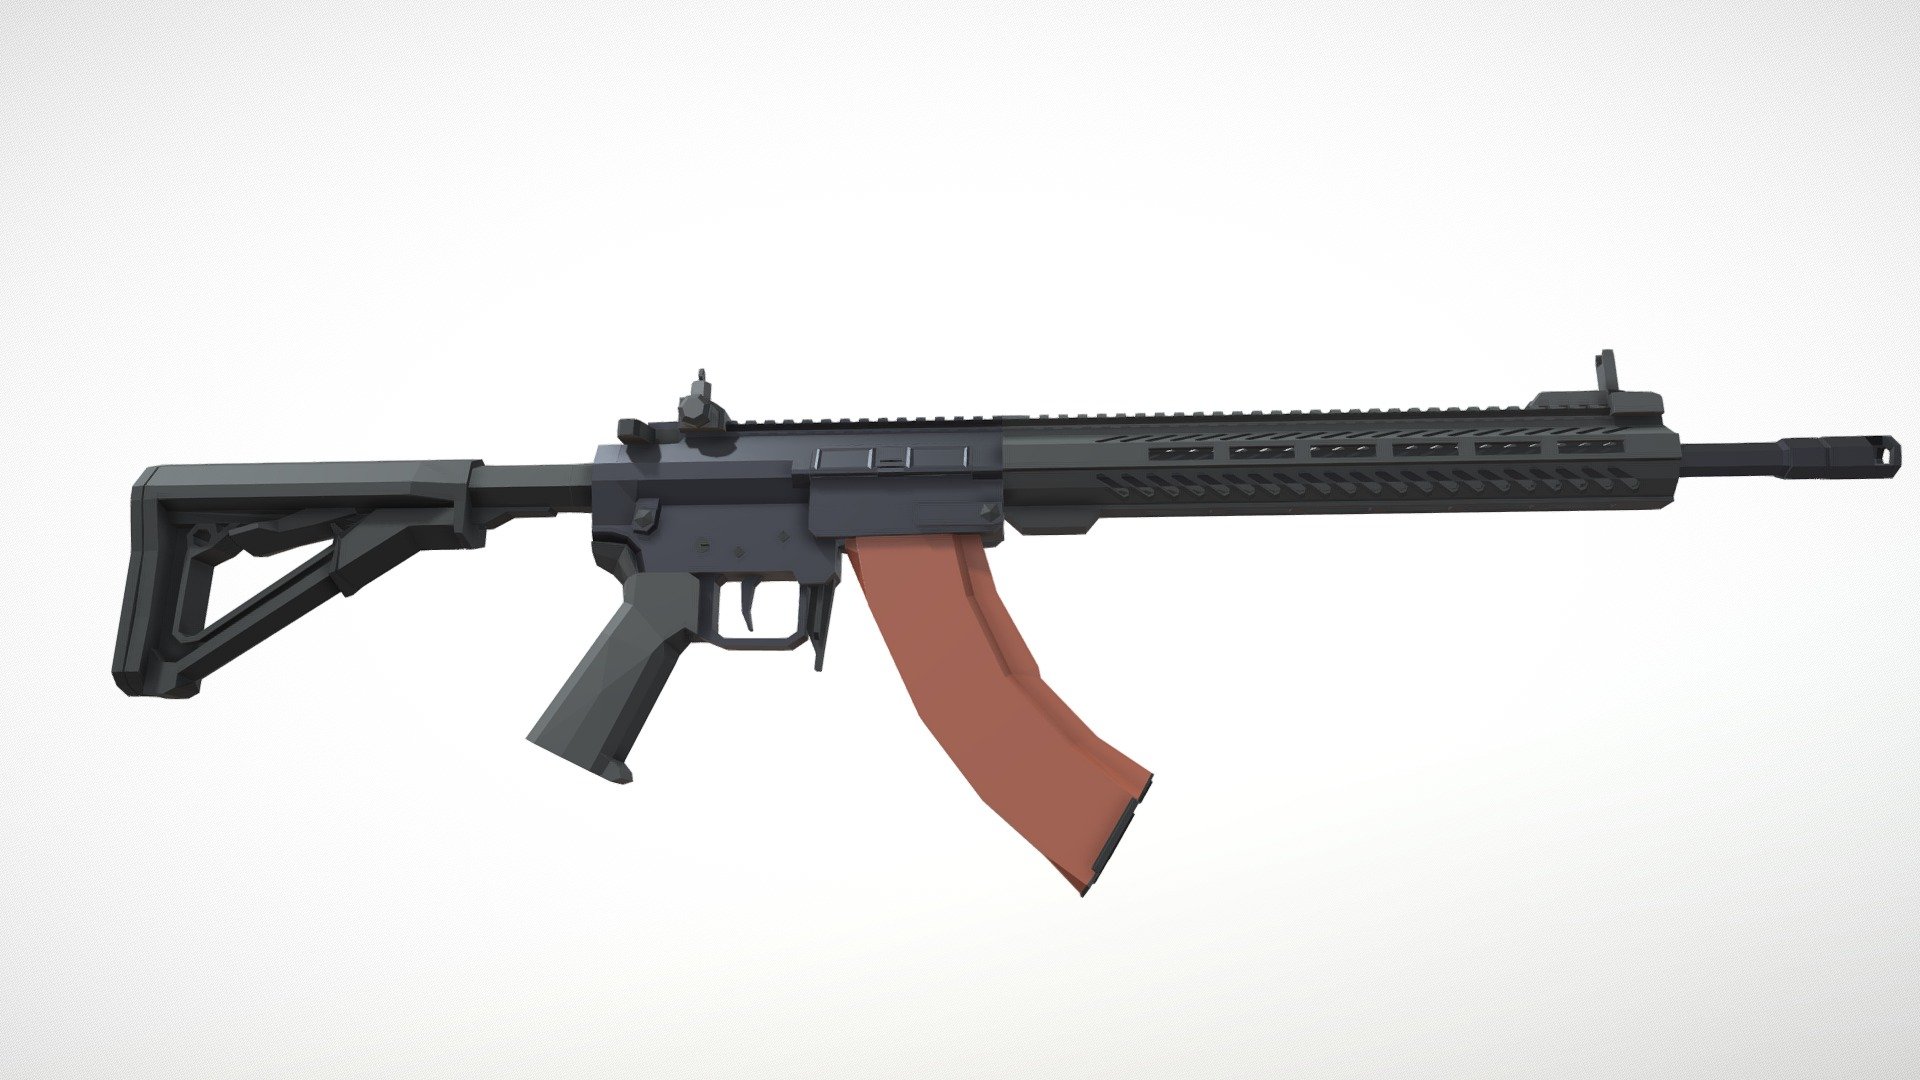 The MK-47 Mutant is a firearm that combines the internal systems and modular nature of an AR-15 with the caliber and magazines of the AKM, firing 7.62x39mm ammunition directly from any standard AK magazine. While this weapon is available in many barrel lenghts, this model has a barrel lenght of 15.7 inches, with an AK-type muzzle brake.

I've included a dark orange polymer AKM magazine with this model, but let me know if you want or need a different type of magazine! - Low-Poly MK-47 Mutant - Download Free 3D model by notcplkerry 3d model